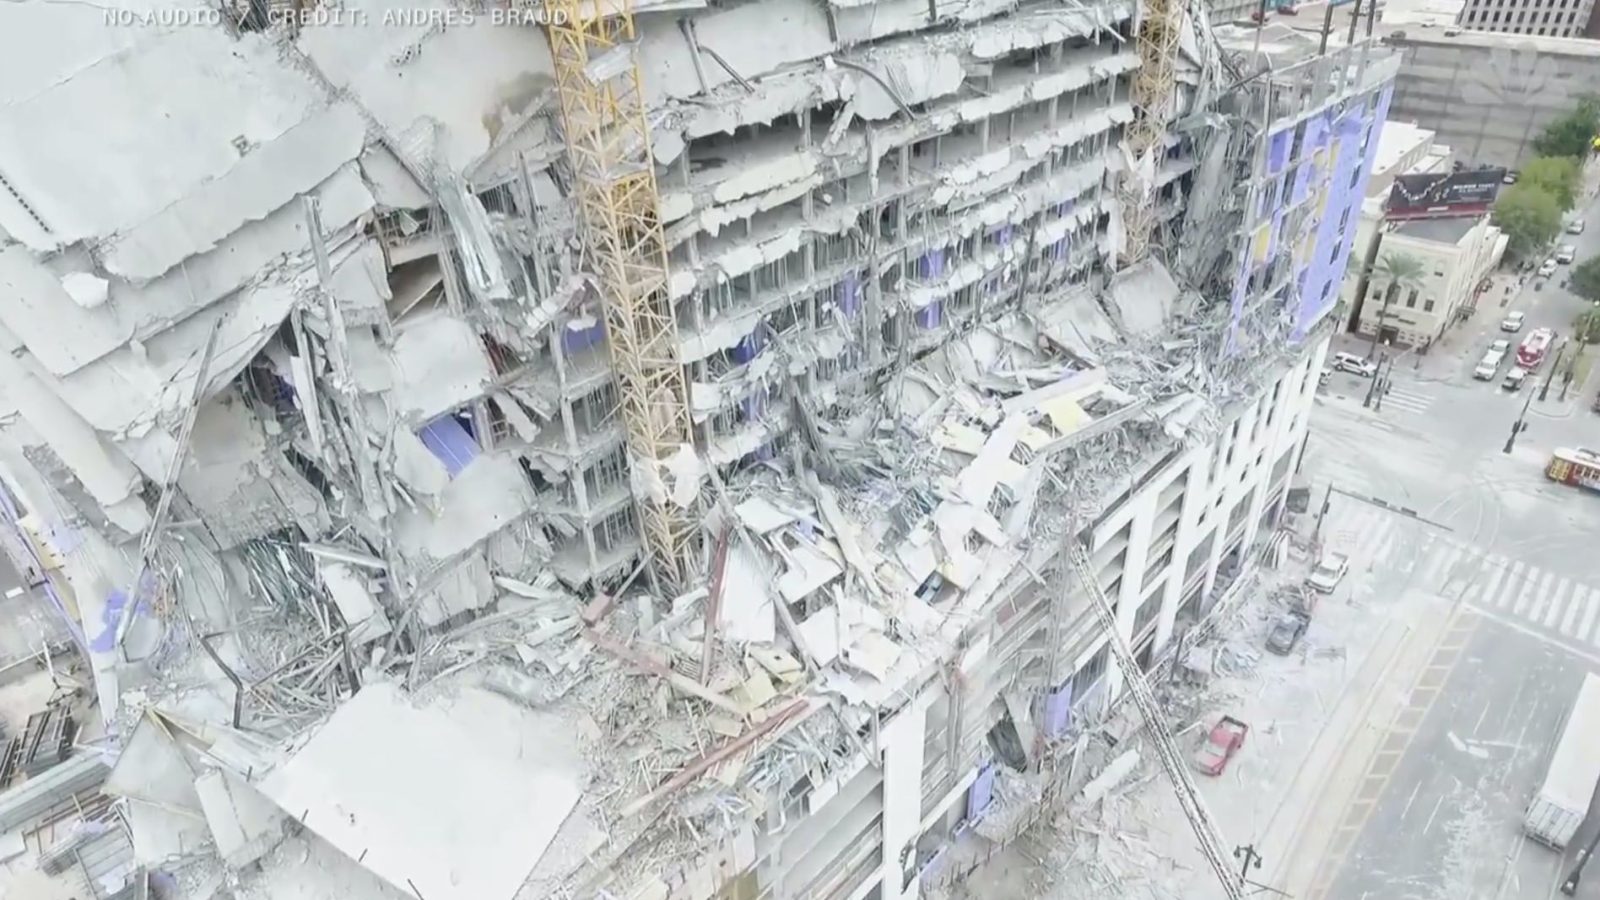 Drone-video-shows-aftermath-collapse-Hard-Rock-Hotel-in-New-Orleans.jpg